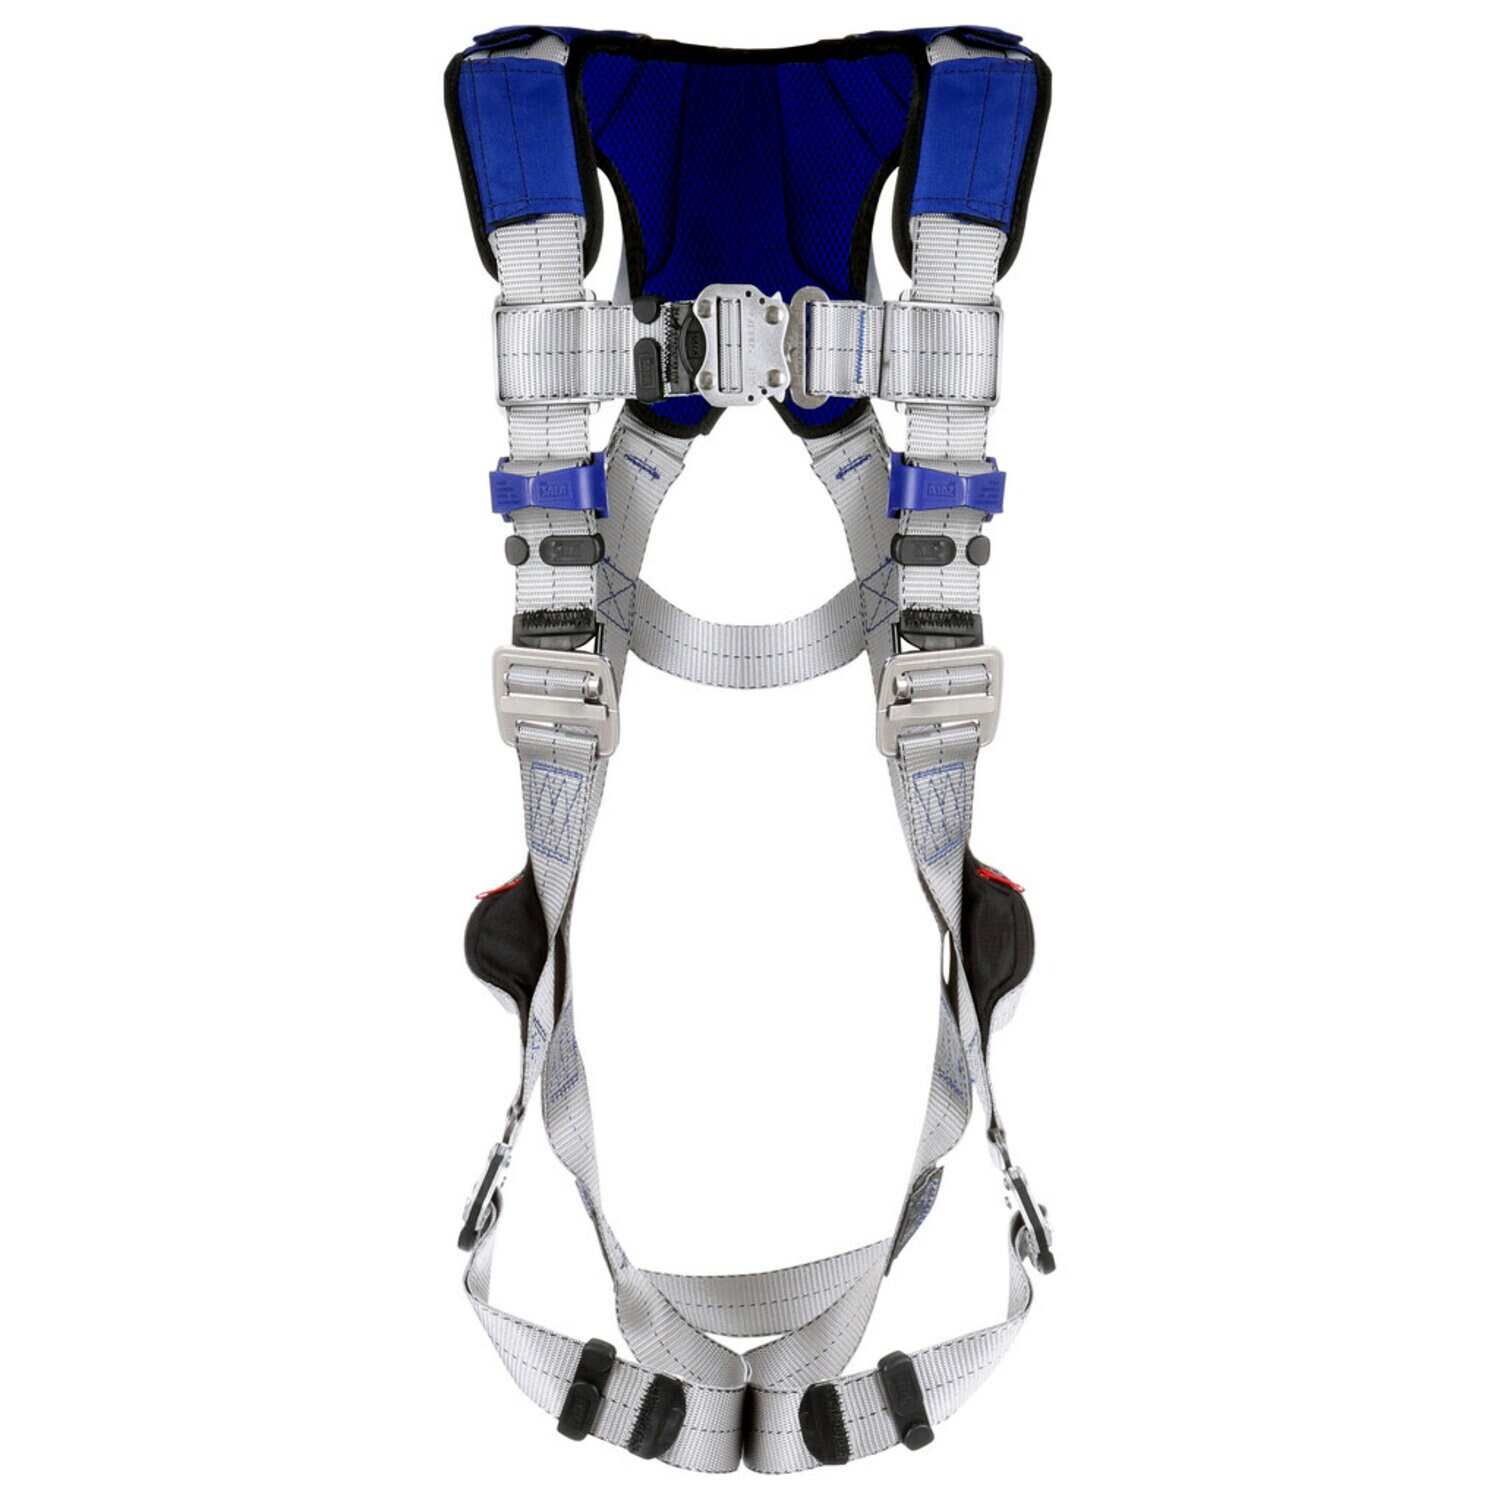 7012817674 - 3M DBI-SALA ExoFit X100 Comfort Vest Safety Harness 1401187, Large, Stainless Steel Hardware